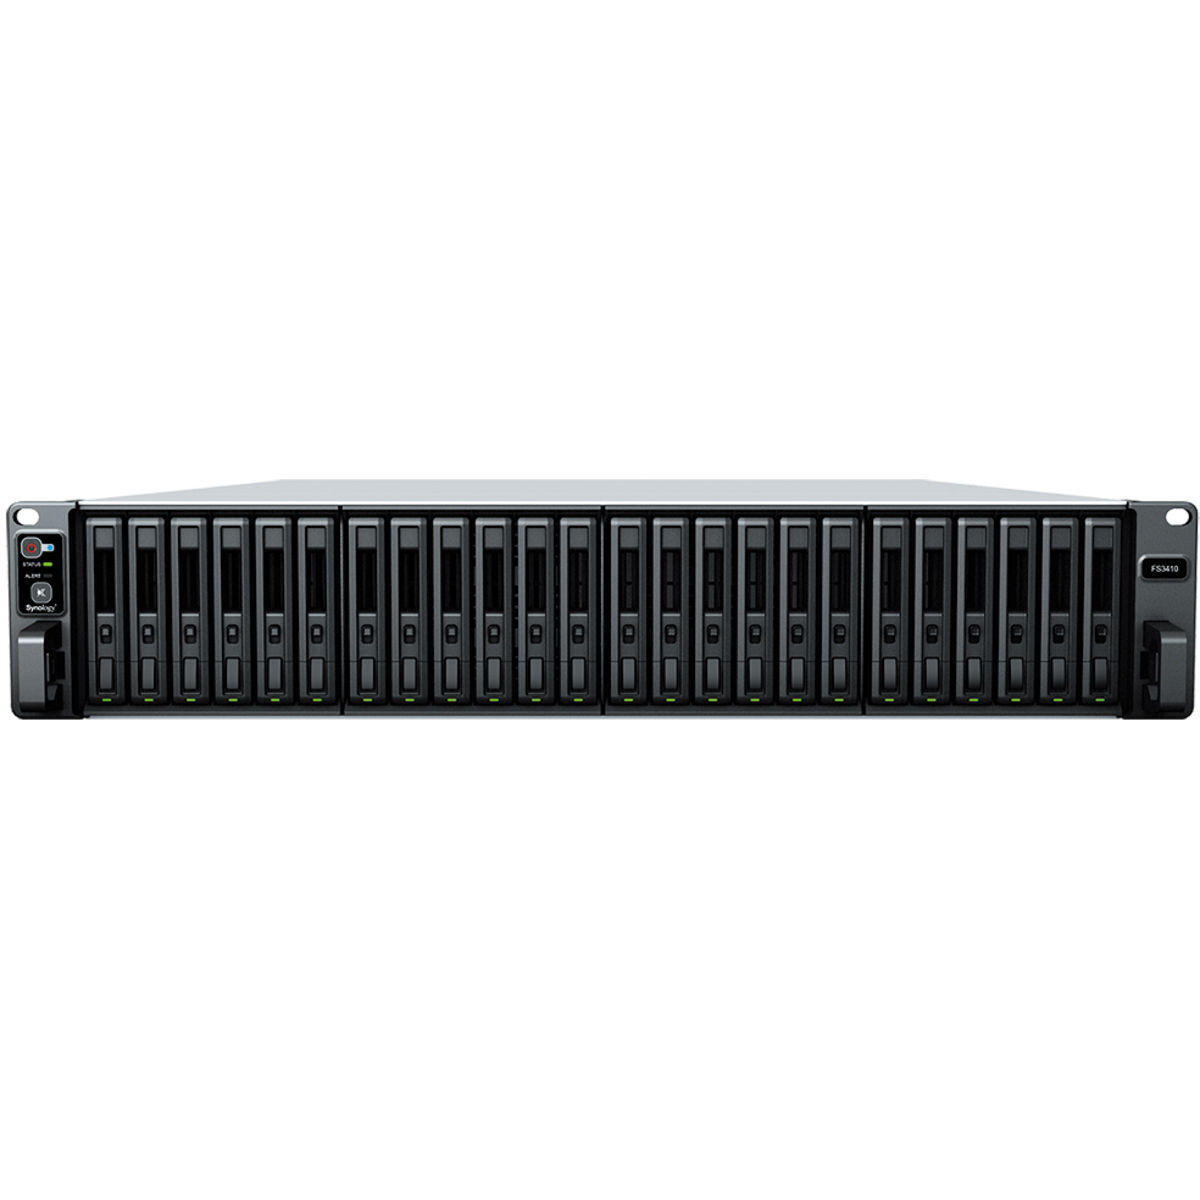 Synology FlashStation FS3410 136tb 24-Bay RackMount Large Business / Enterprise NAS - Network Attached Storage Device 17x8tb TeamGroup EX2 Elite T253E2008T0C101 2.5 550/520MB/s SATA 6Gb/s SSD CONSUMER Class Drives Installed - Burn-In Tested FlashStation FS3410